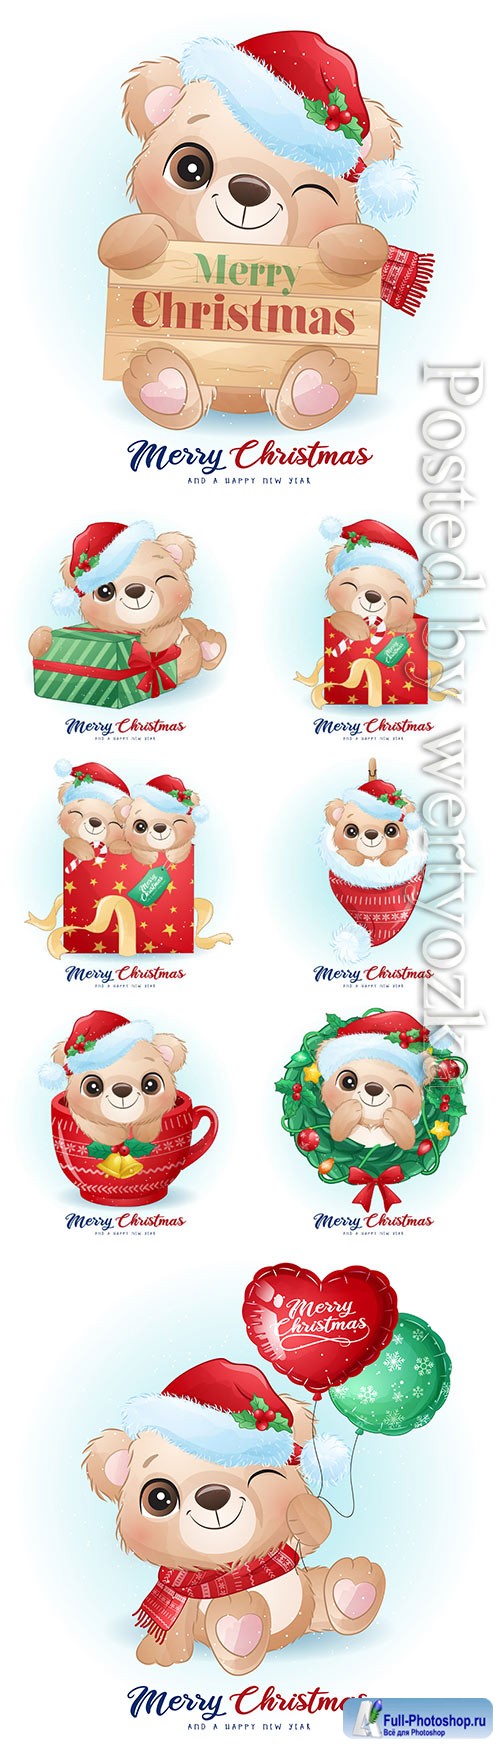 Cute doodle bear for christmas day with watercolor vector illustration